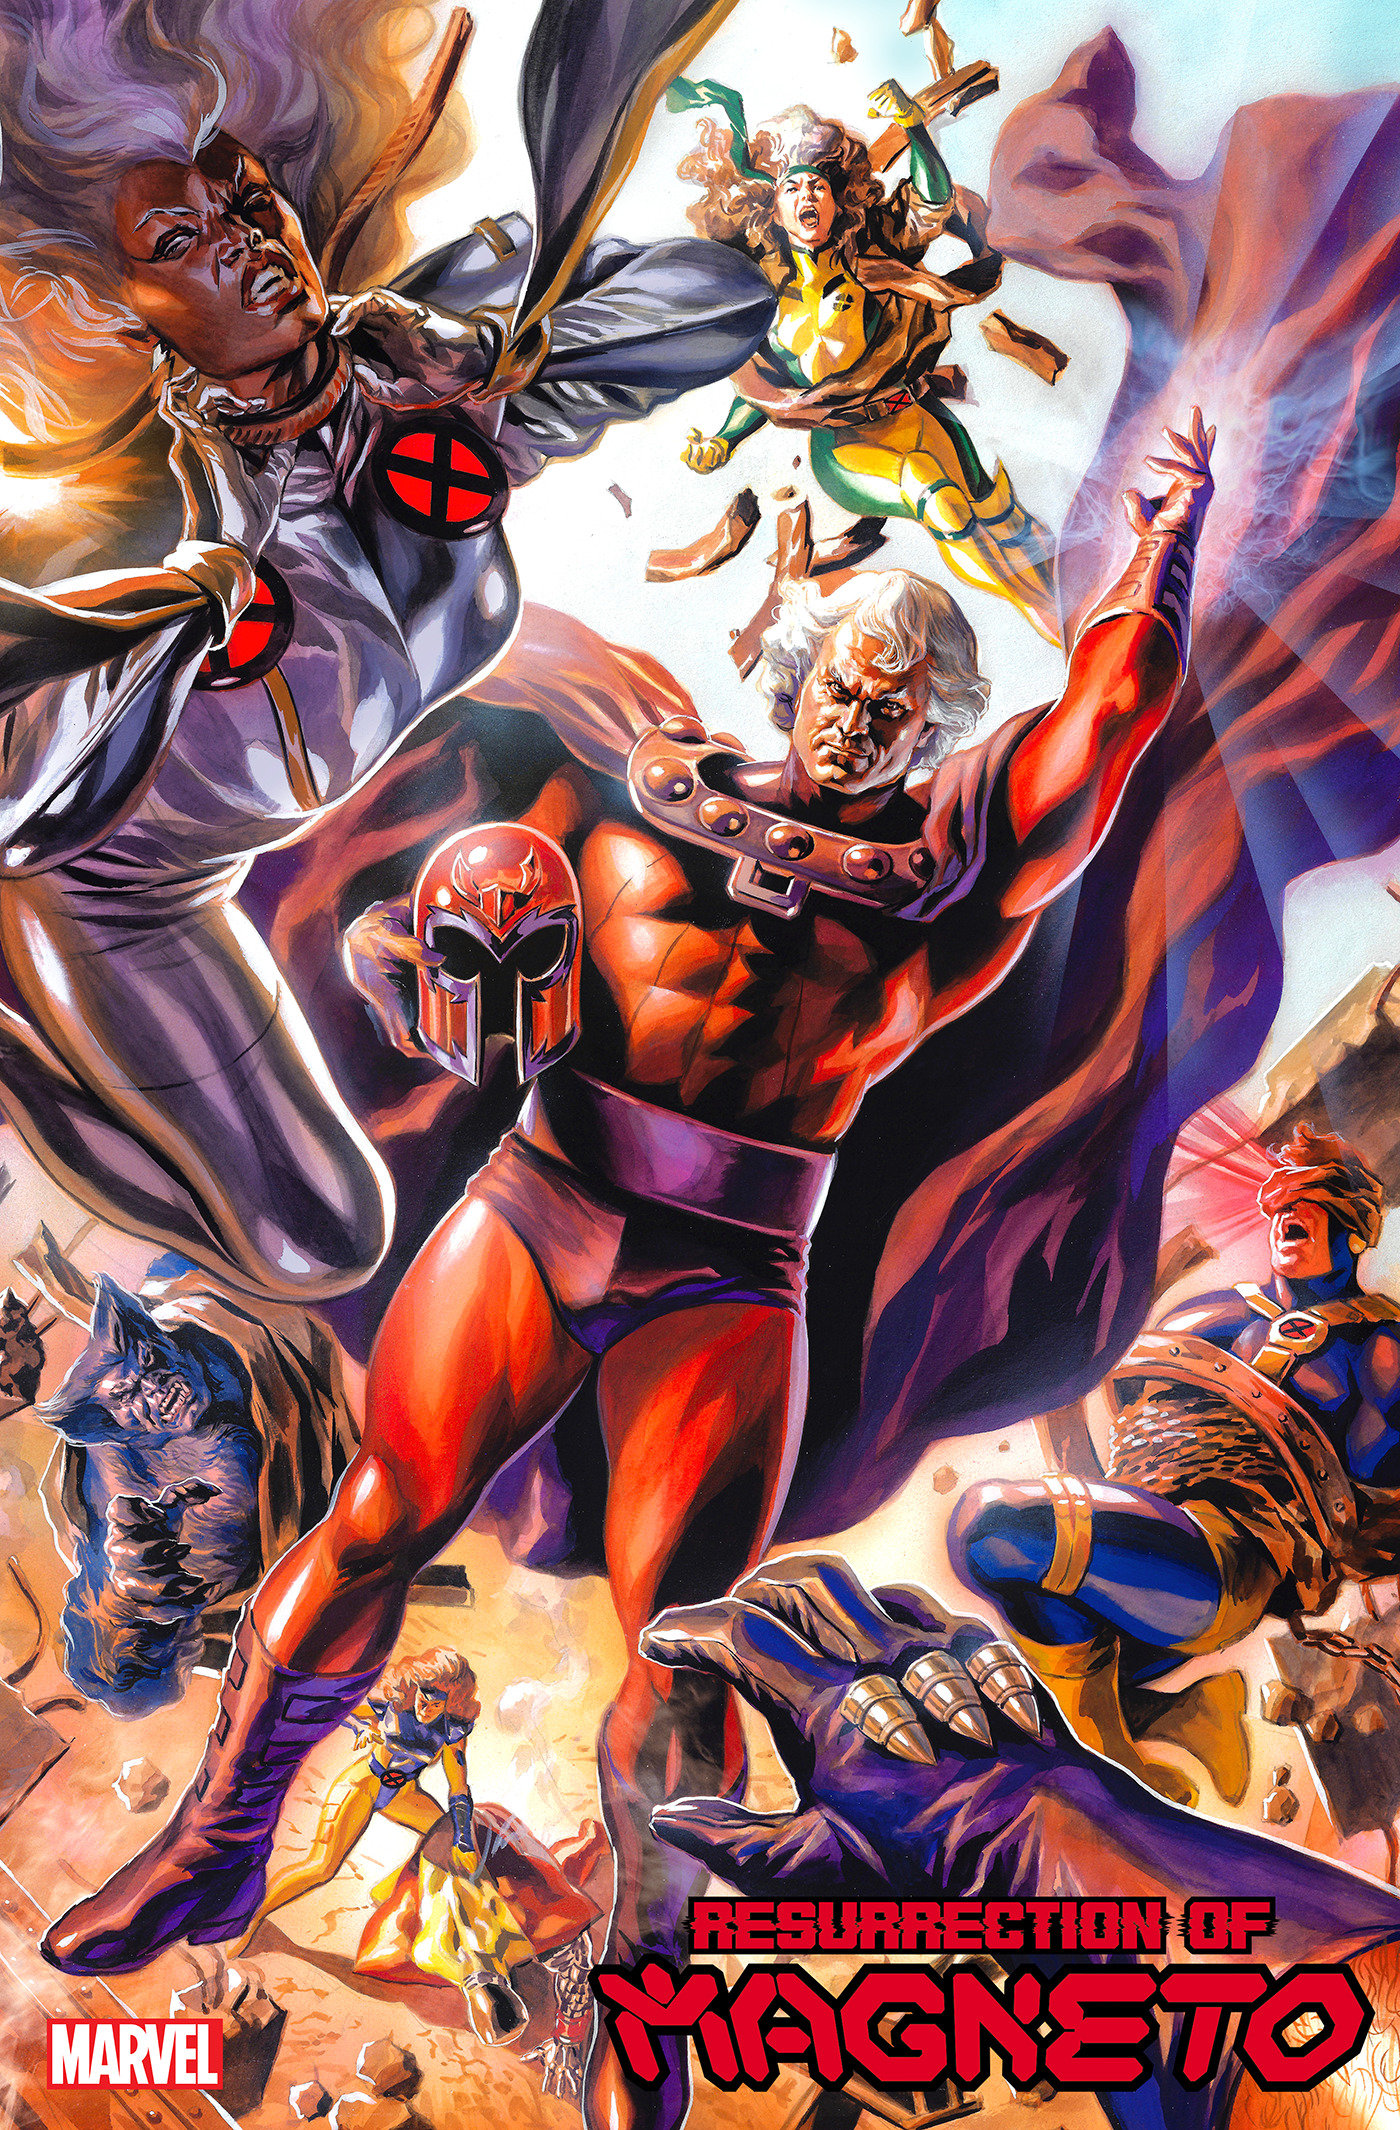 Resurrection of Magneto #4 Felipe Massafera Variant (Fall of the House of X) 1 for 25 Incentive